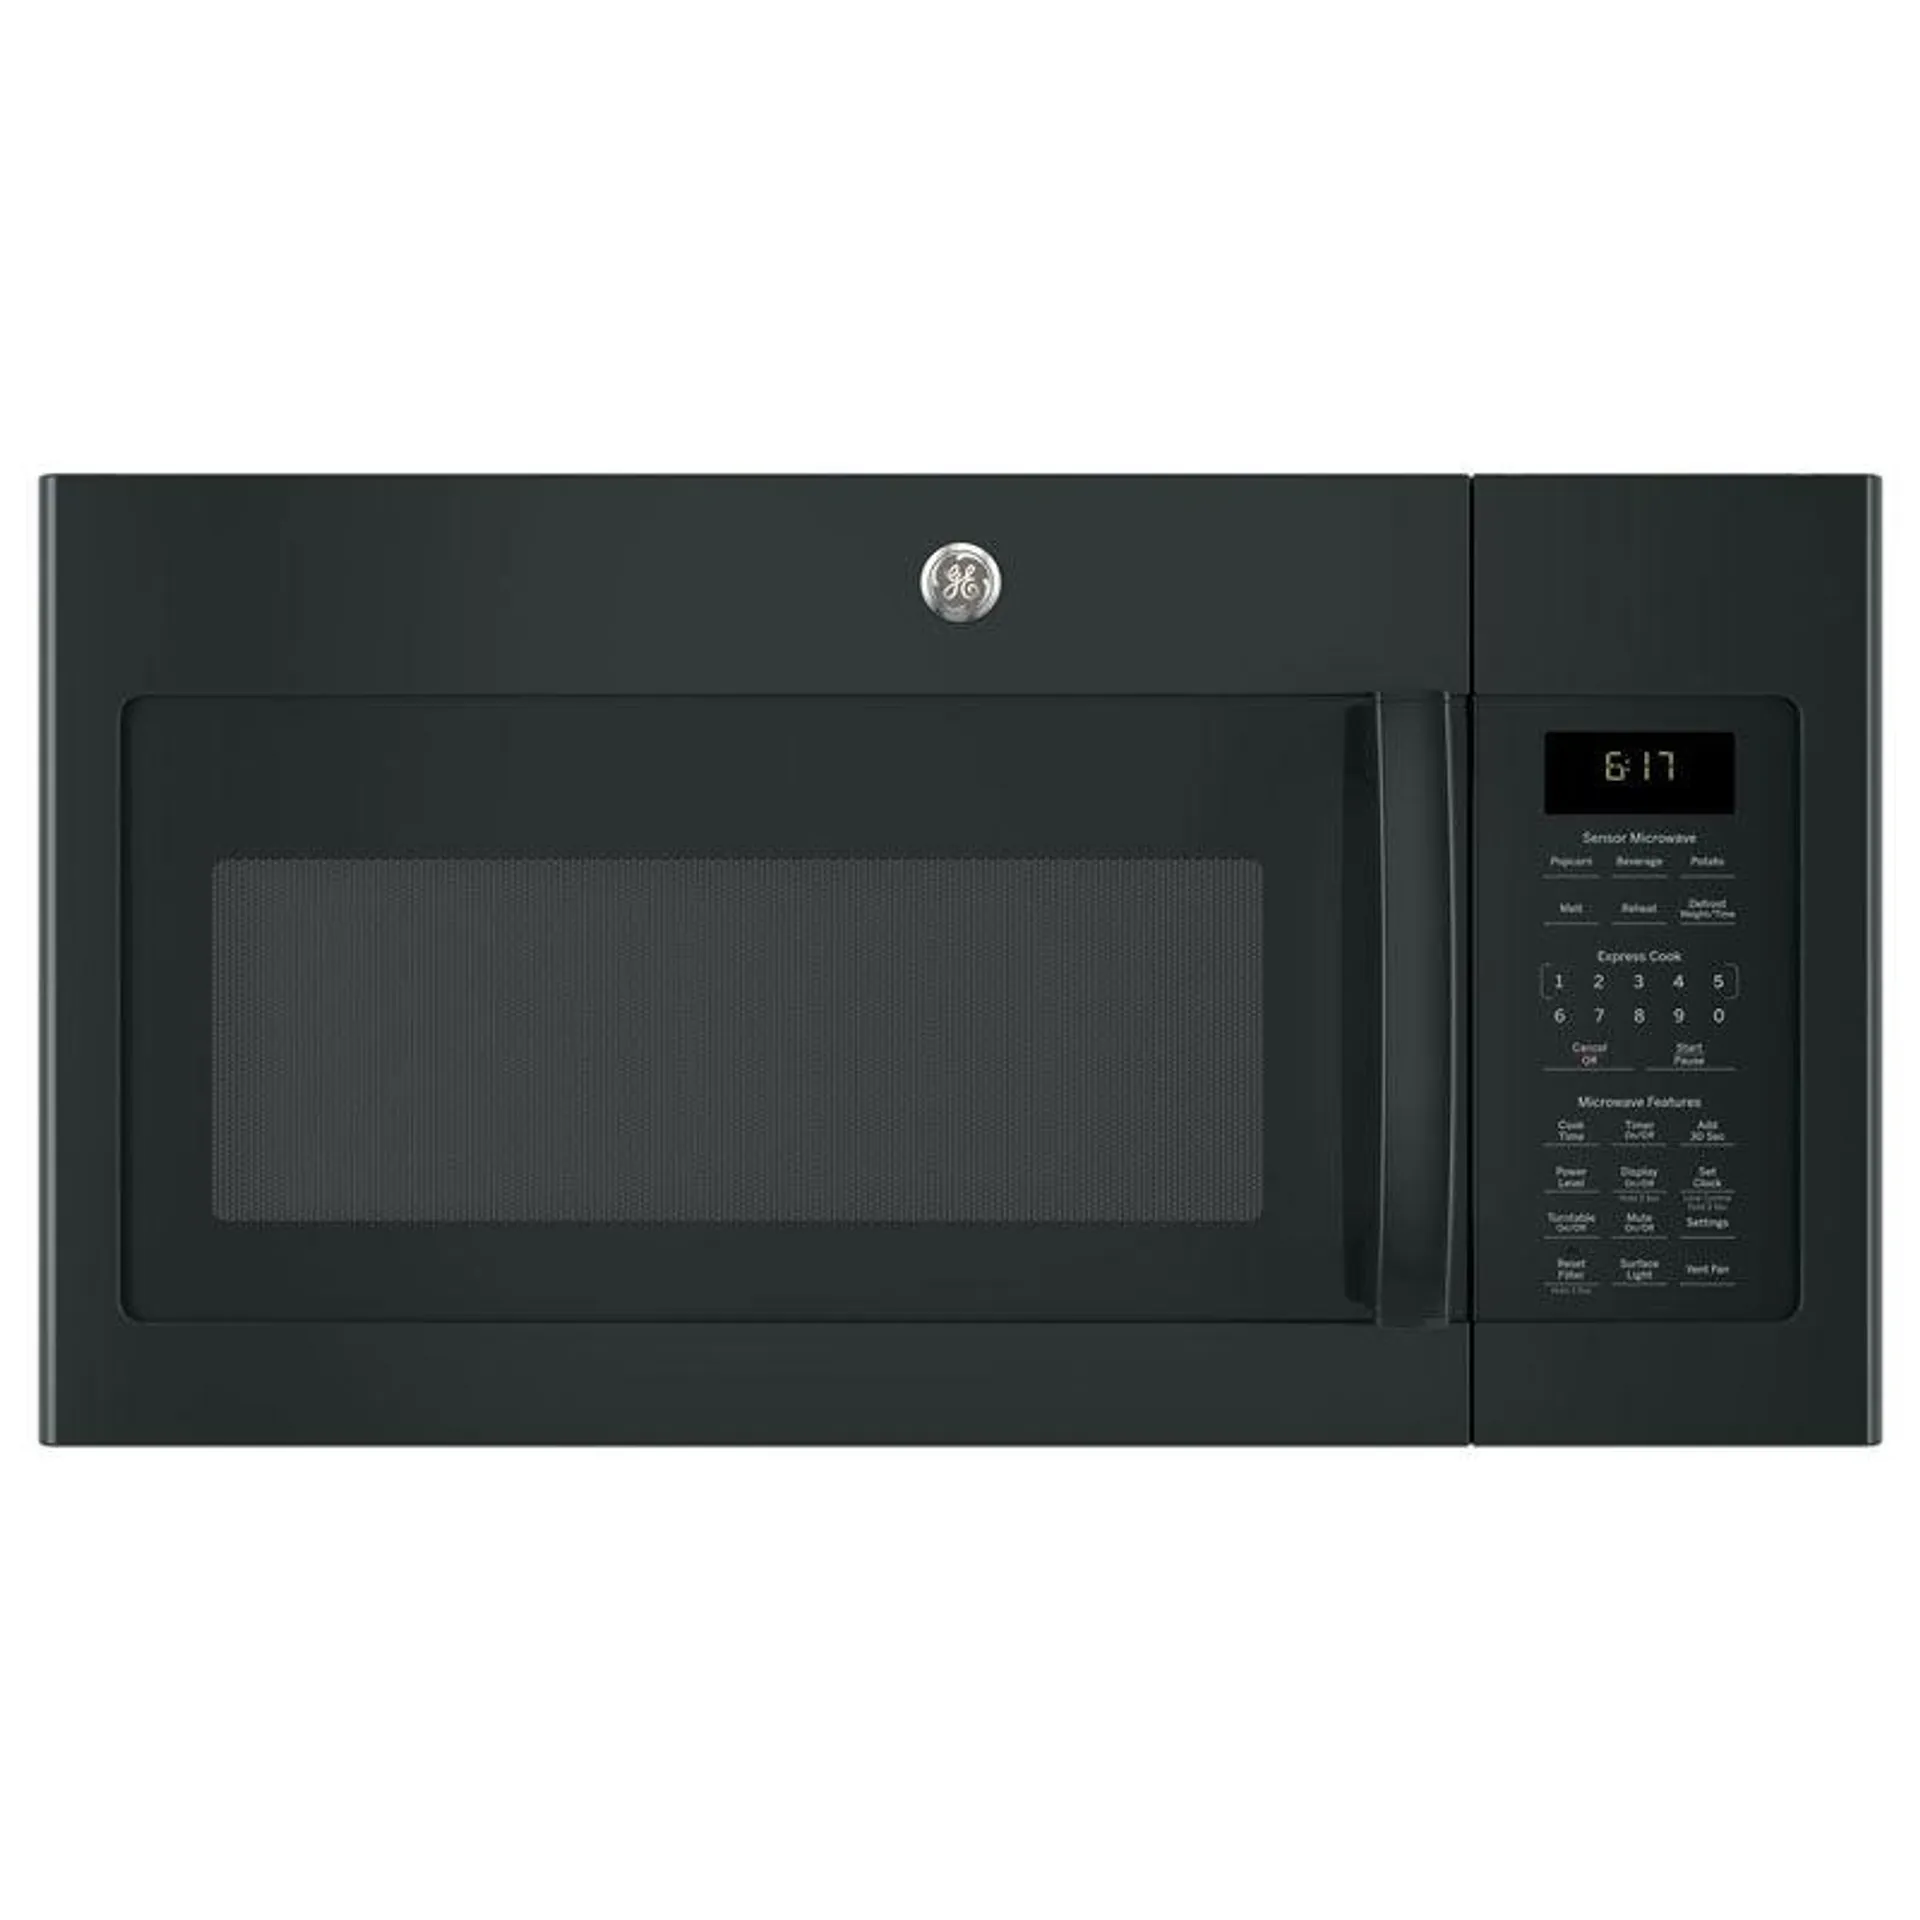 GE 30" 1.7 Cu. Ft. Over-the-Range Microwave with 10 Power Levels, 300 CFM & Sensor Cooking Controls - Black